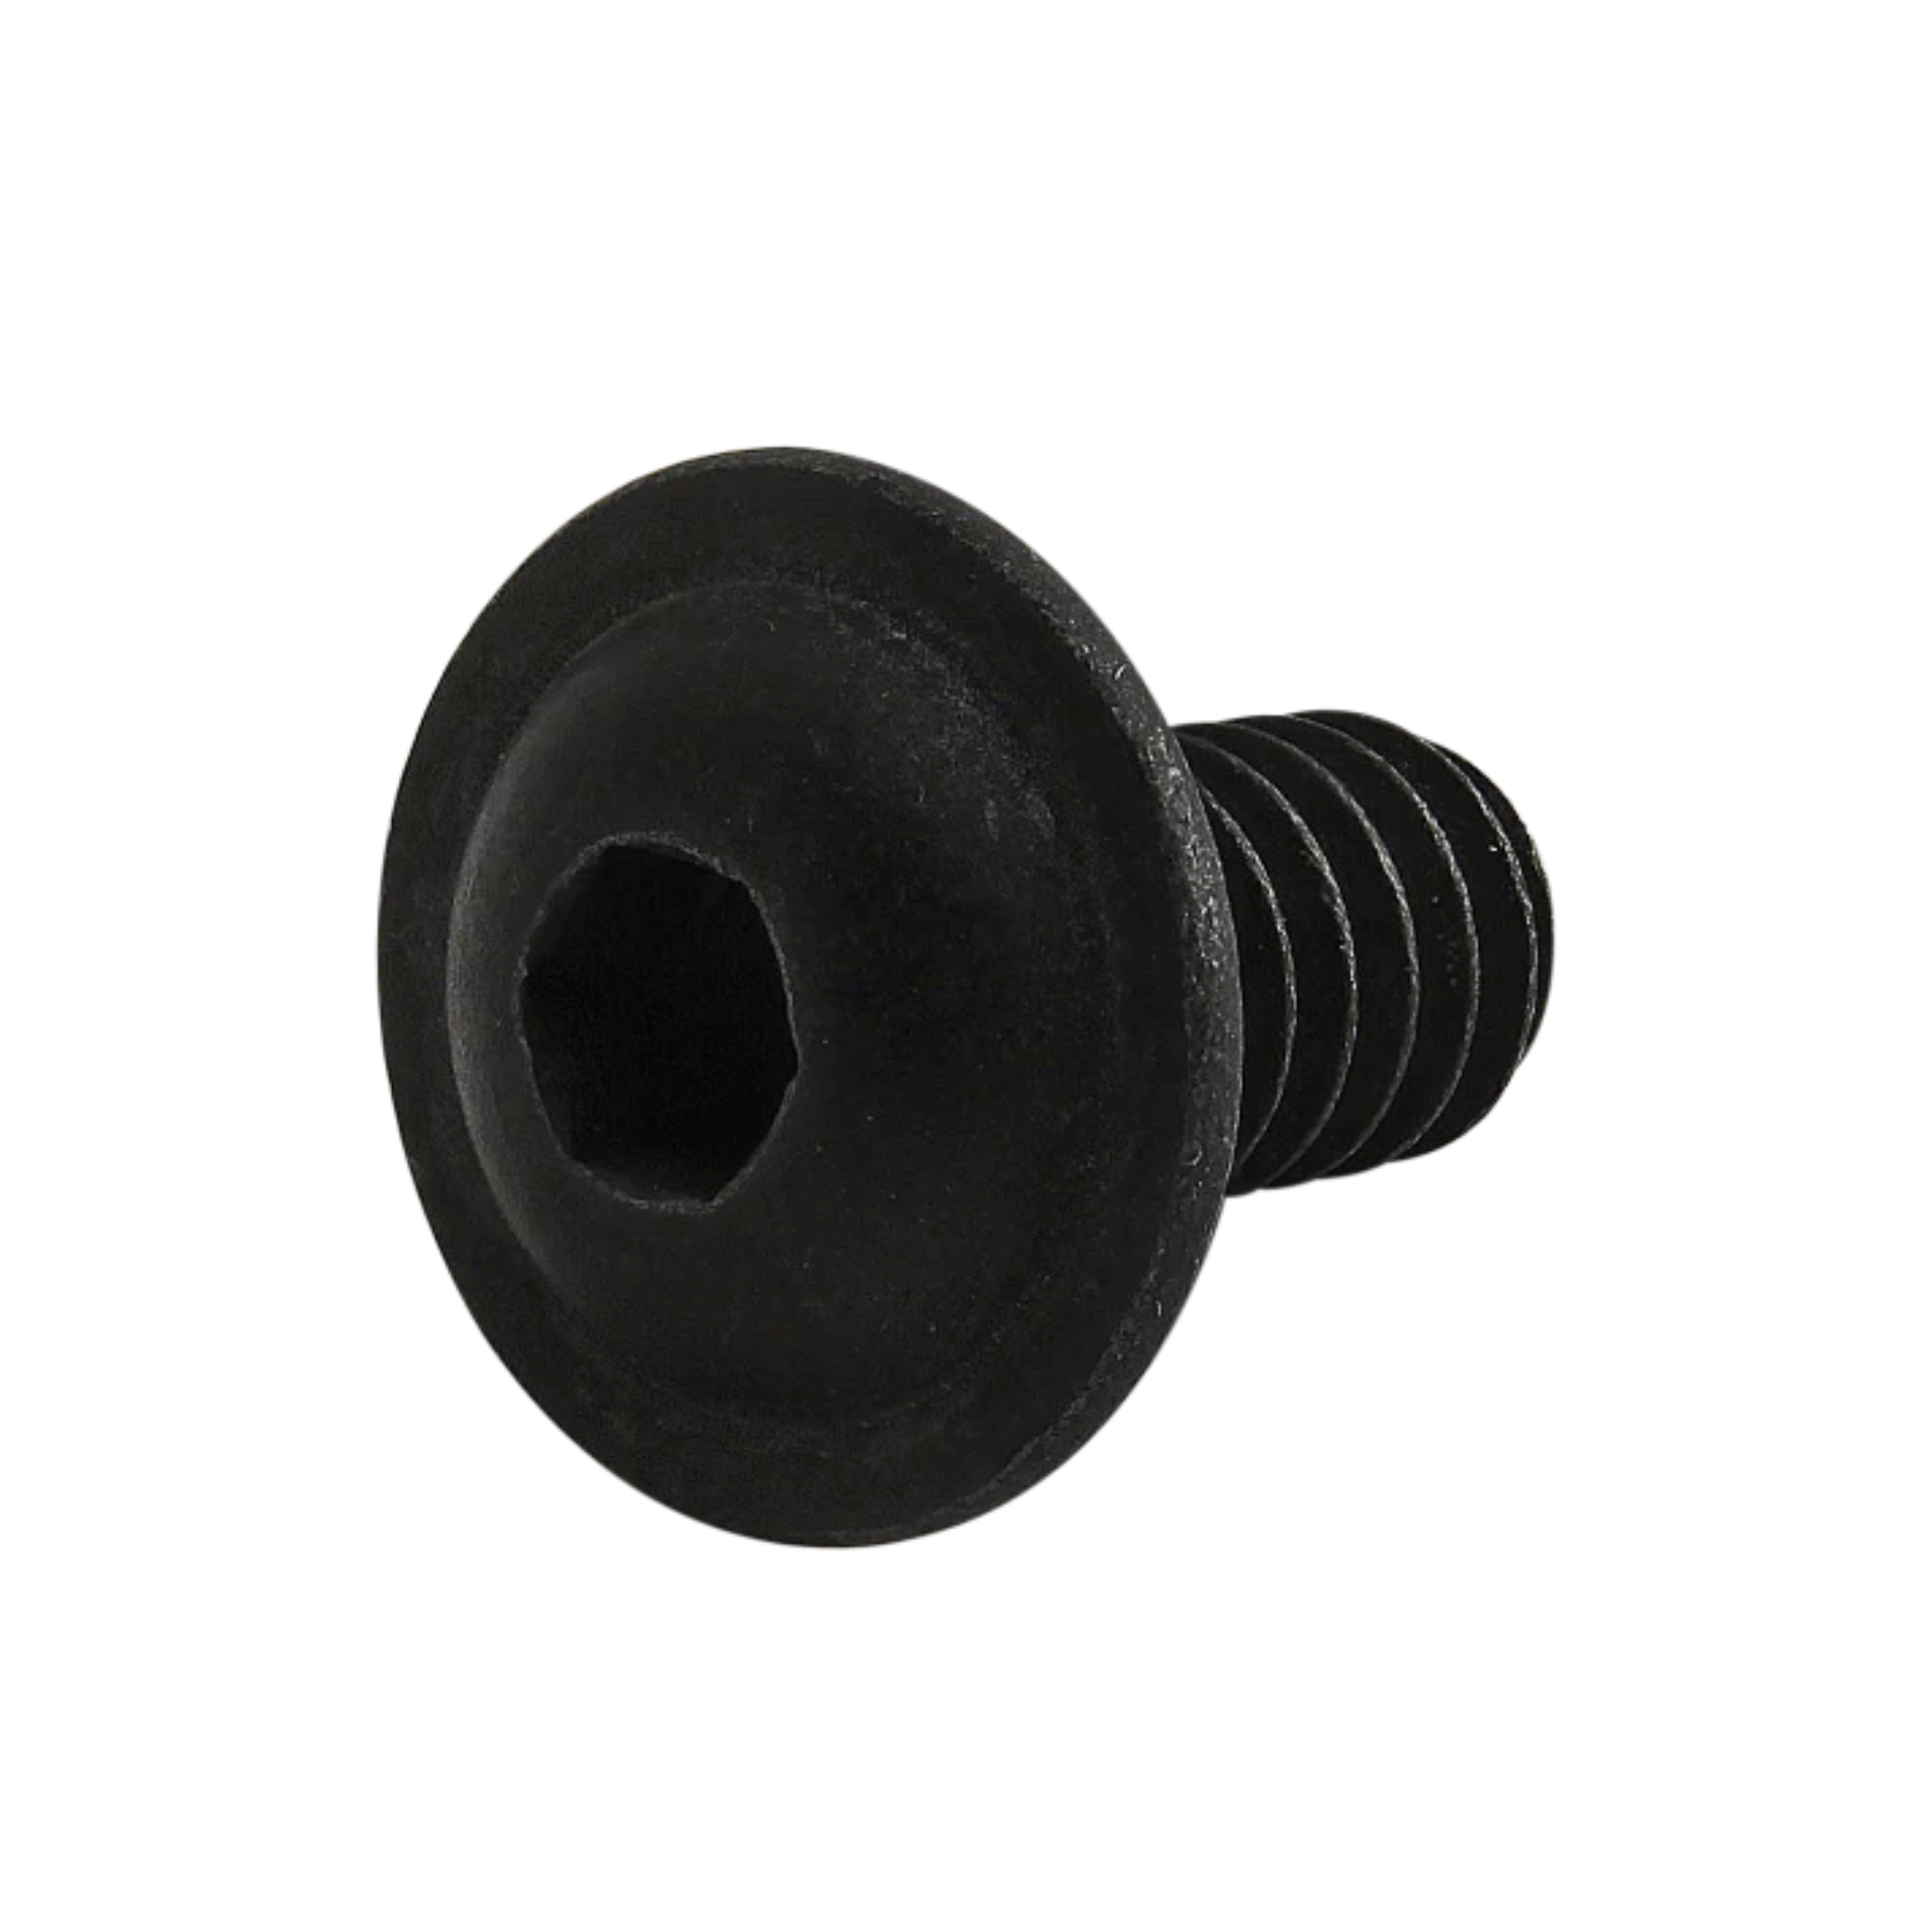 side view of a black metal screw with the head on the left and threading on the right